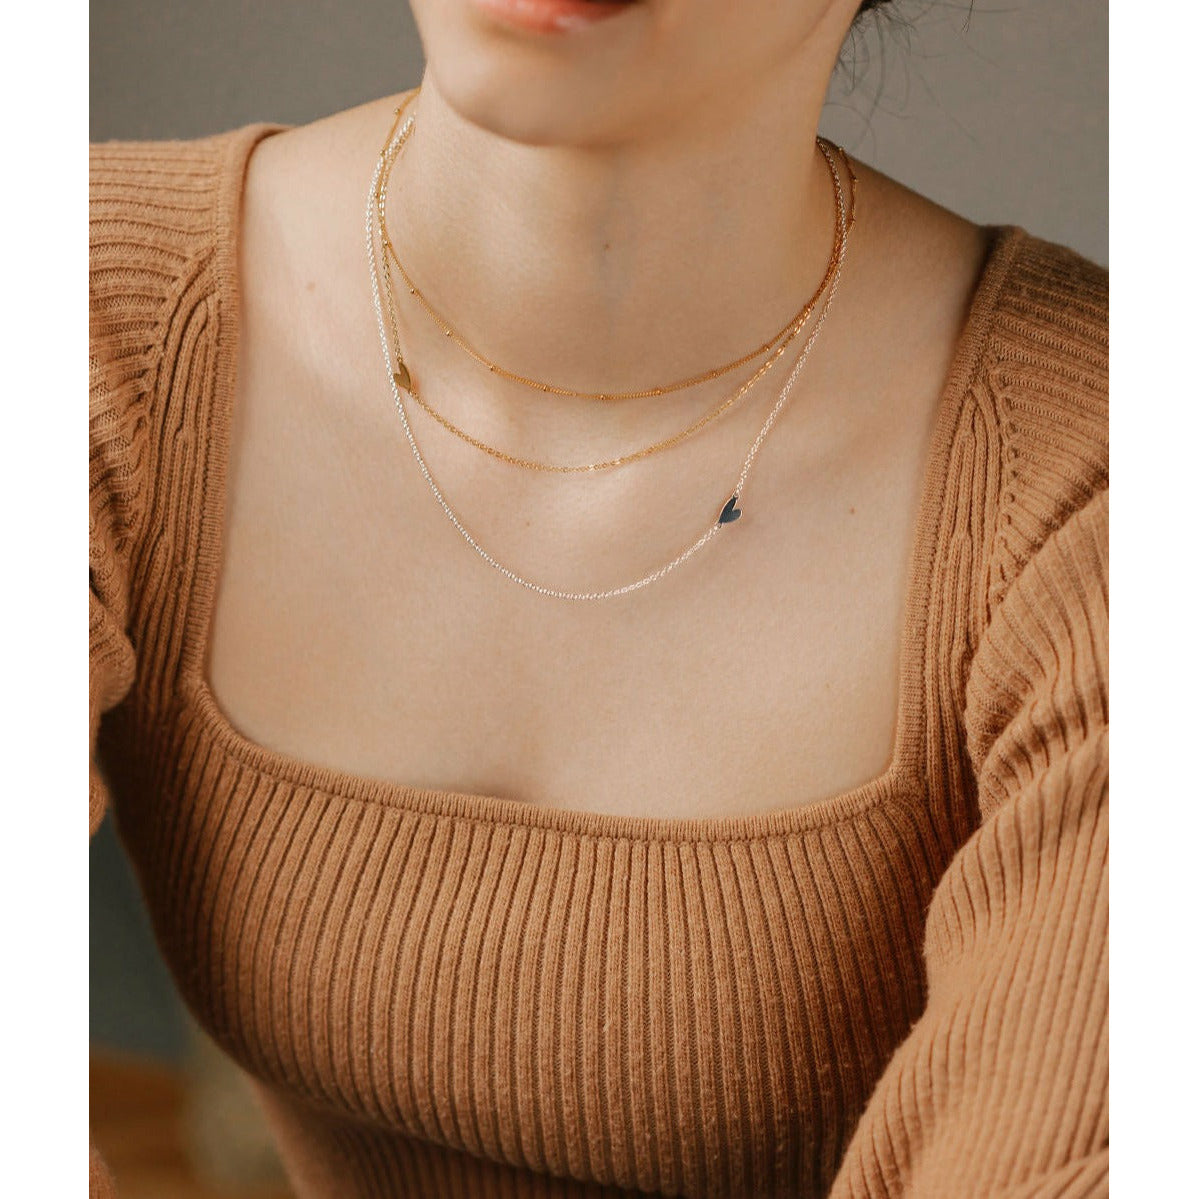 a women is wearing layered heart necklaces